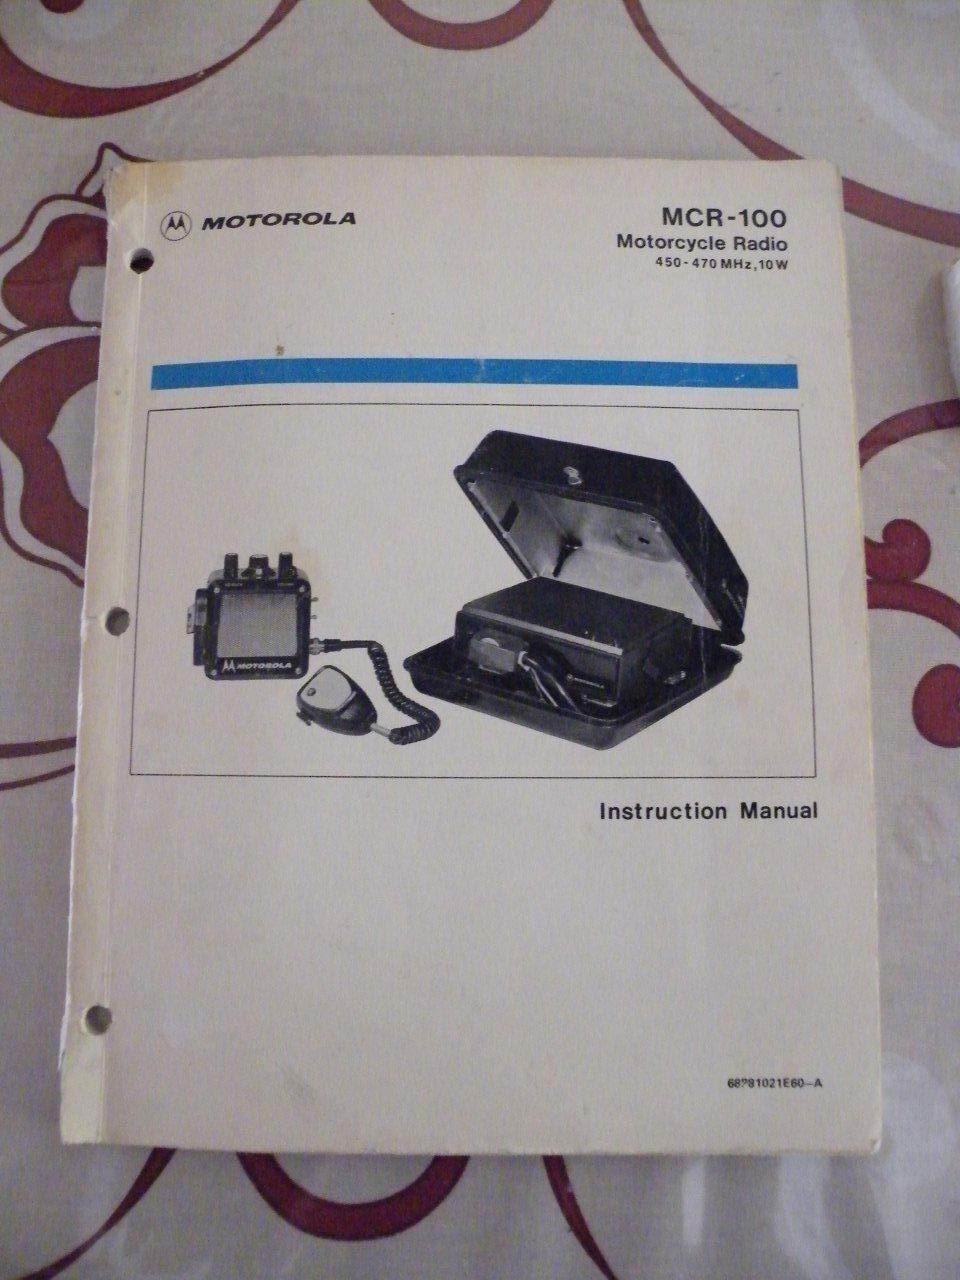 Instruction book showing radio drawer in box.